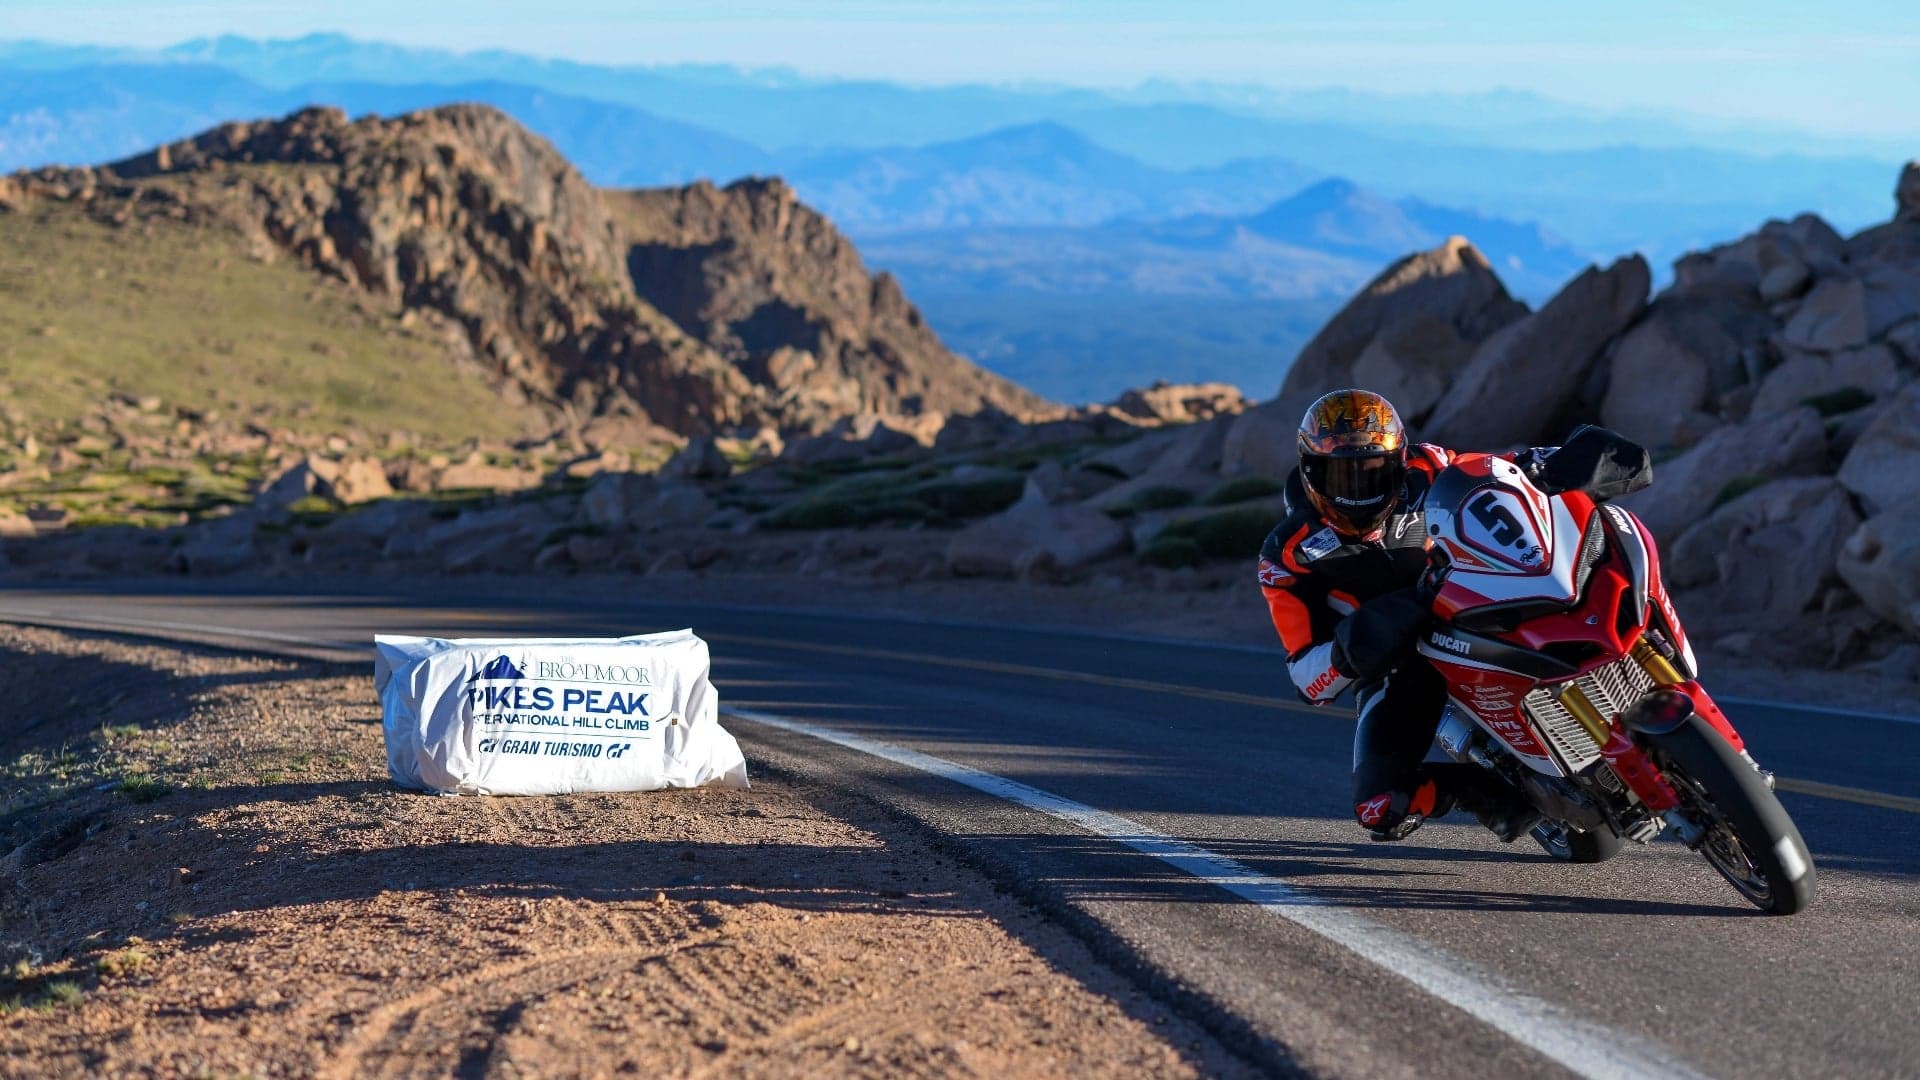 The Fastest Motorcycle up Pikes Peak This Year Was a Mostly-Stock Ducati Multistrada 1260